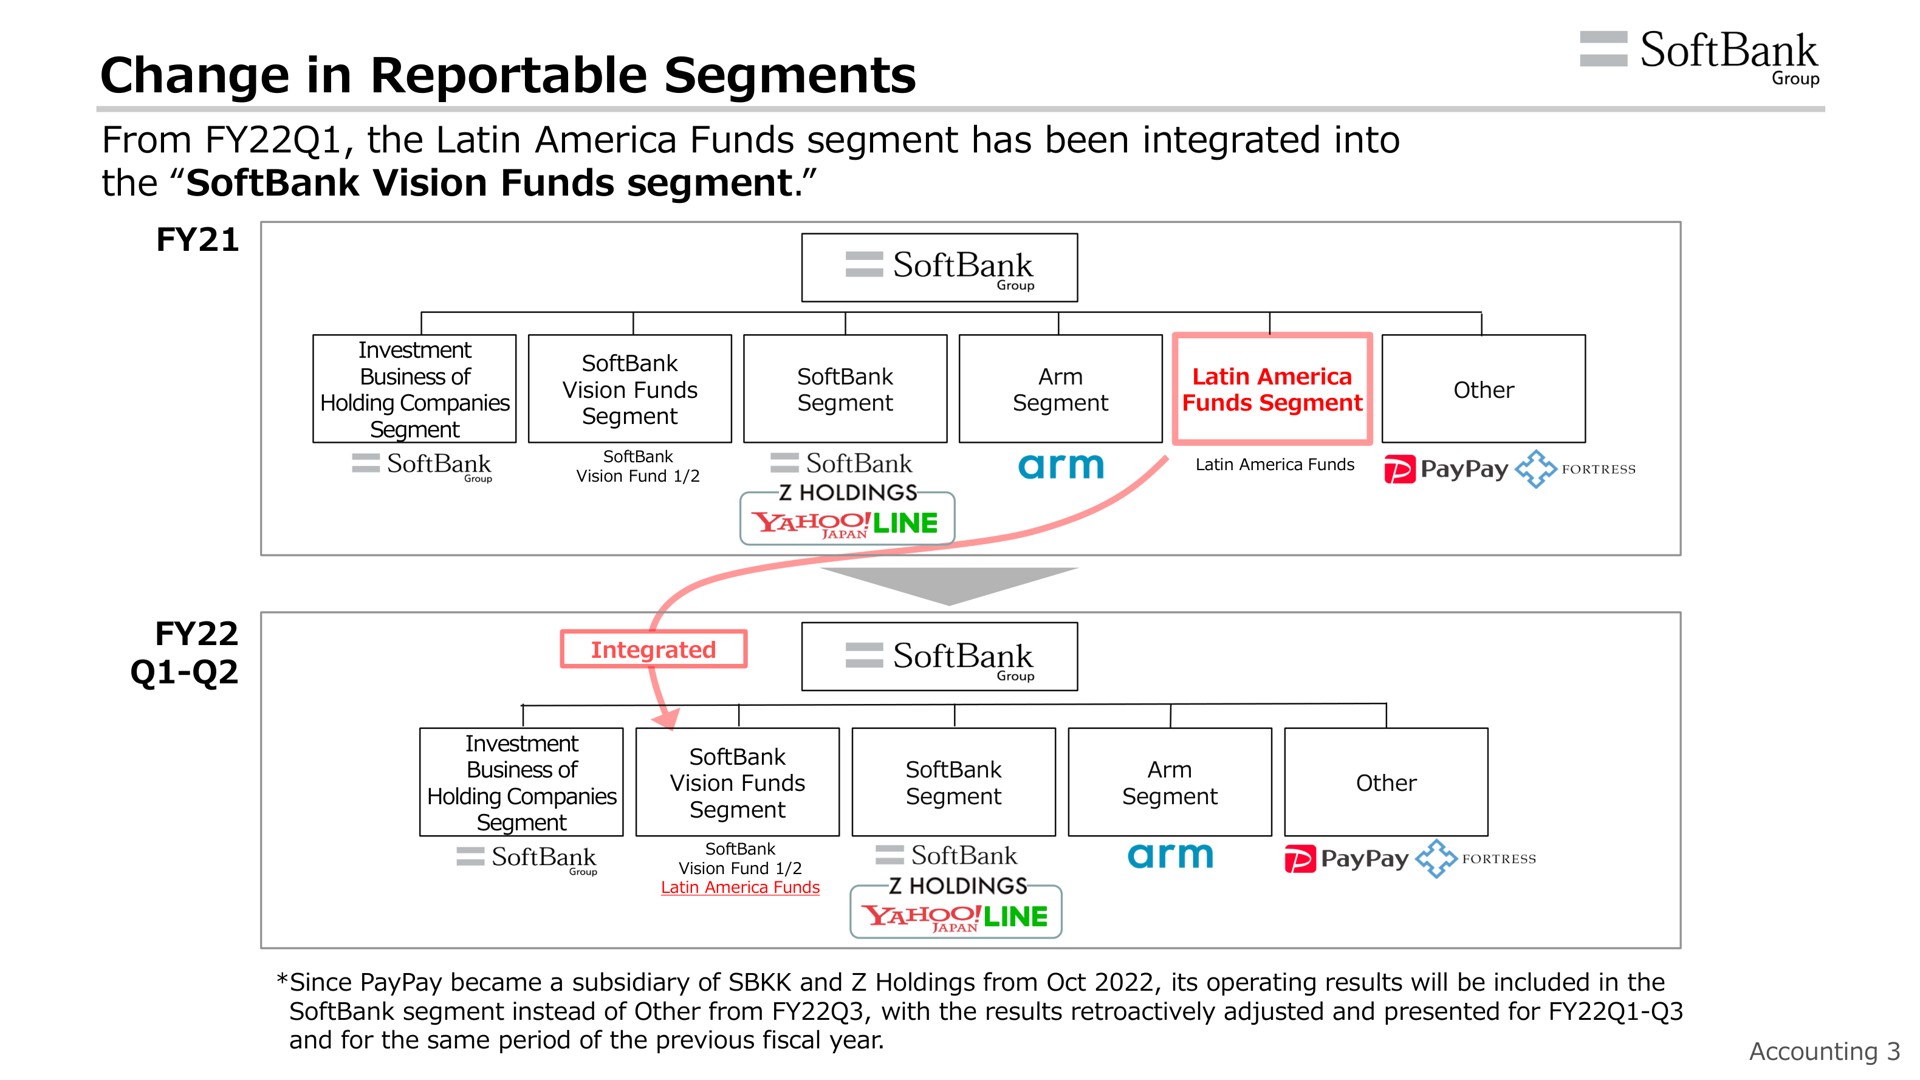 change in reportable segments from the funds segment has been integrated into the vision funds segment | SoftBank